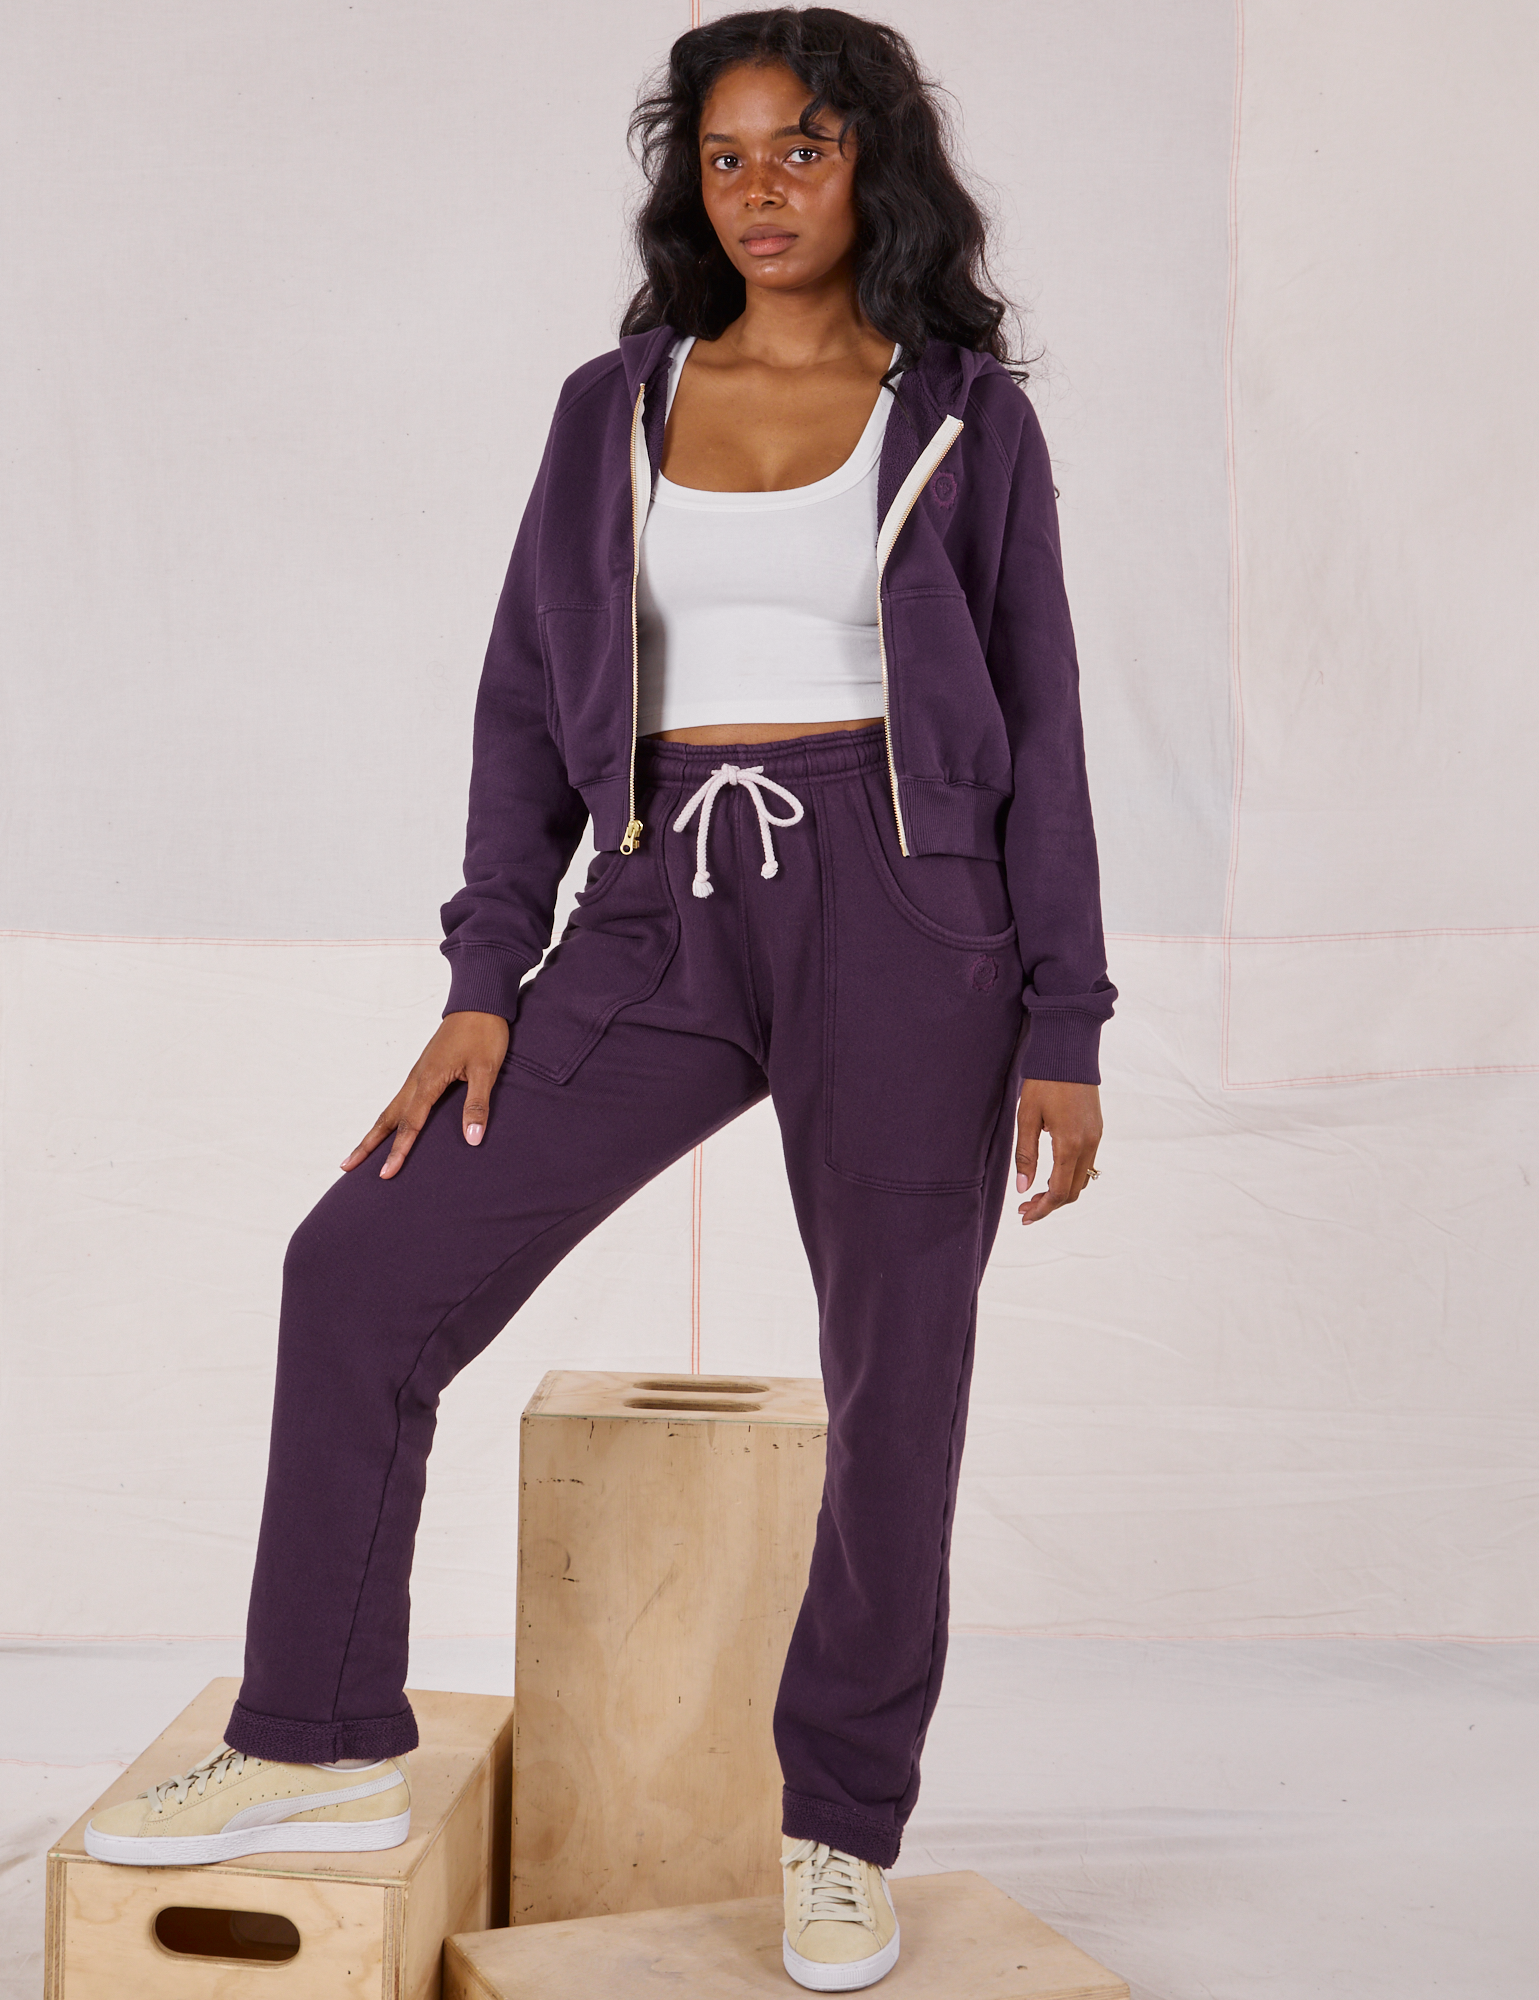 Kandia is 5&#39;3&quot; and wearing P Cropped Zip Hoodie in Nebula Purple paired with matching Rolled Cuff Sweat Pants